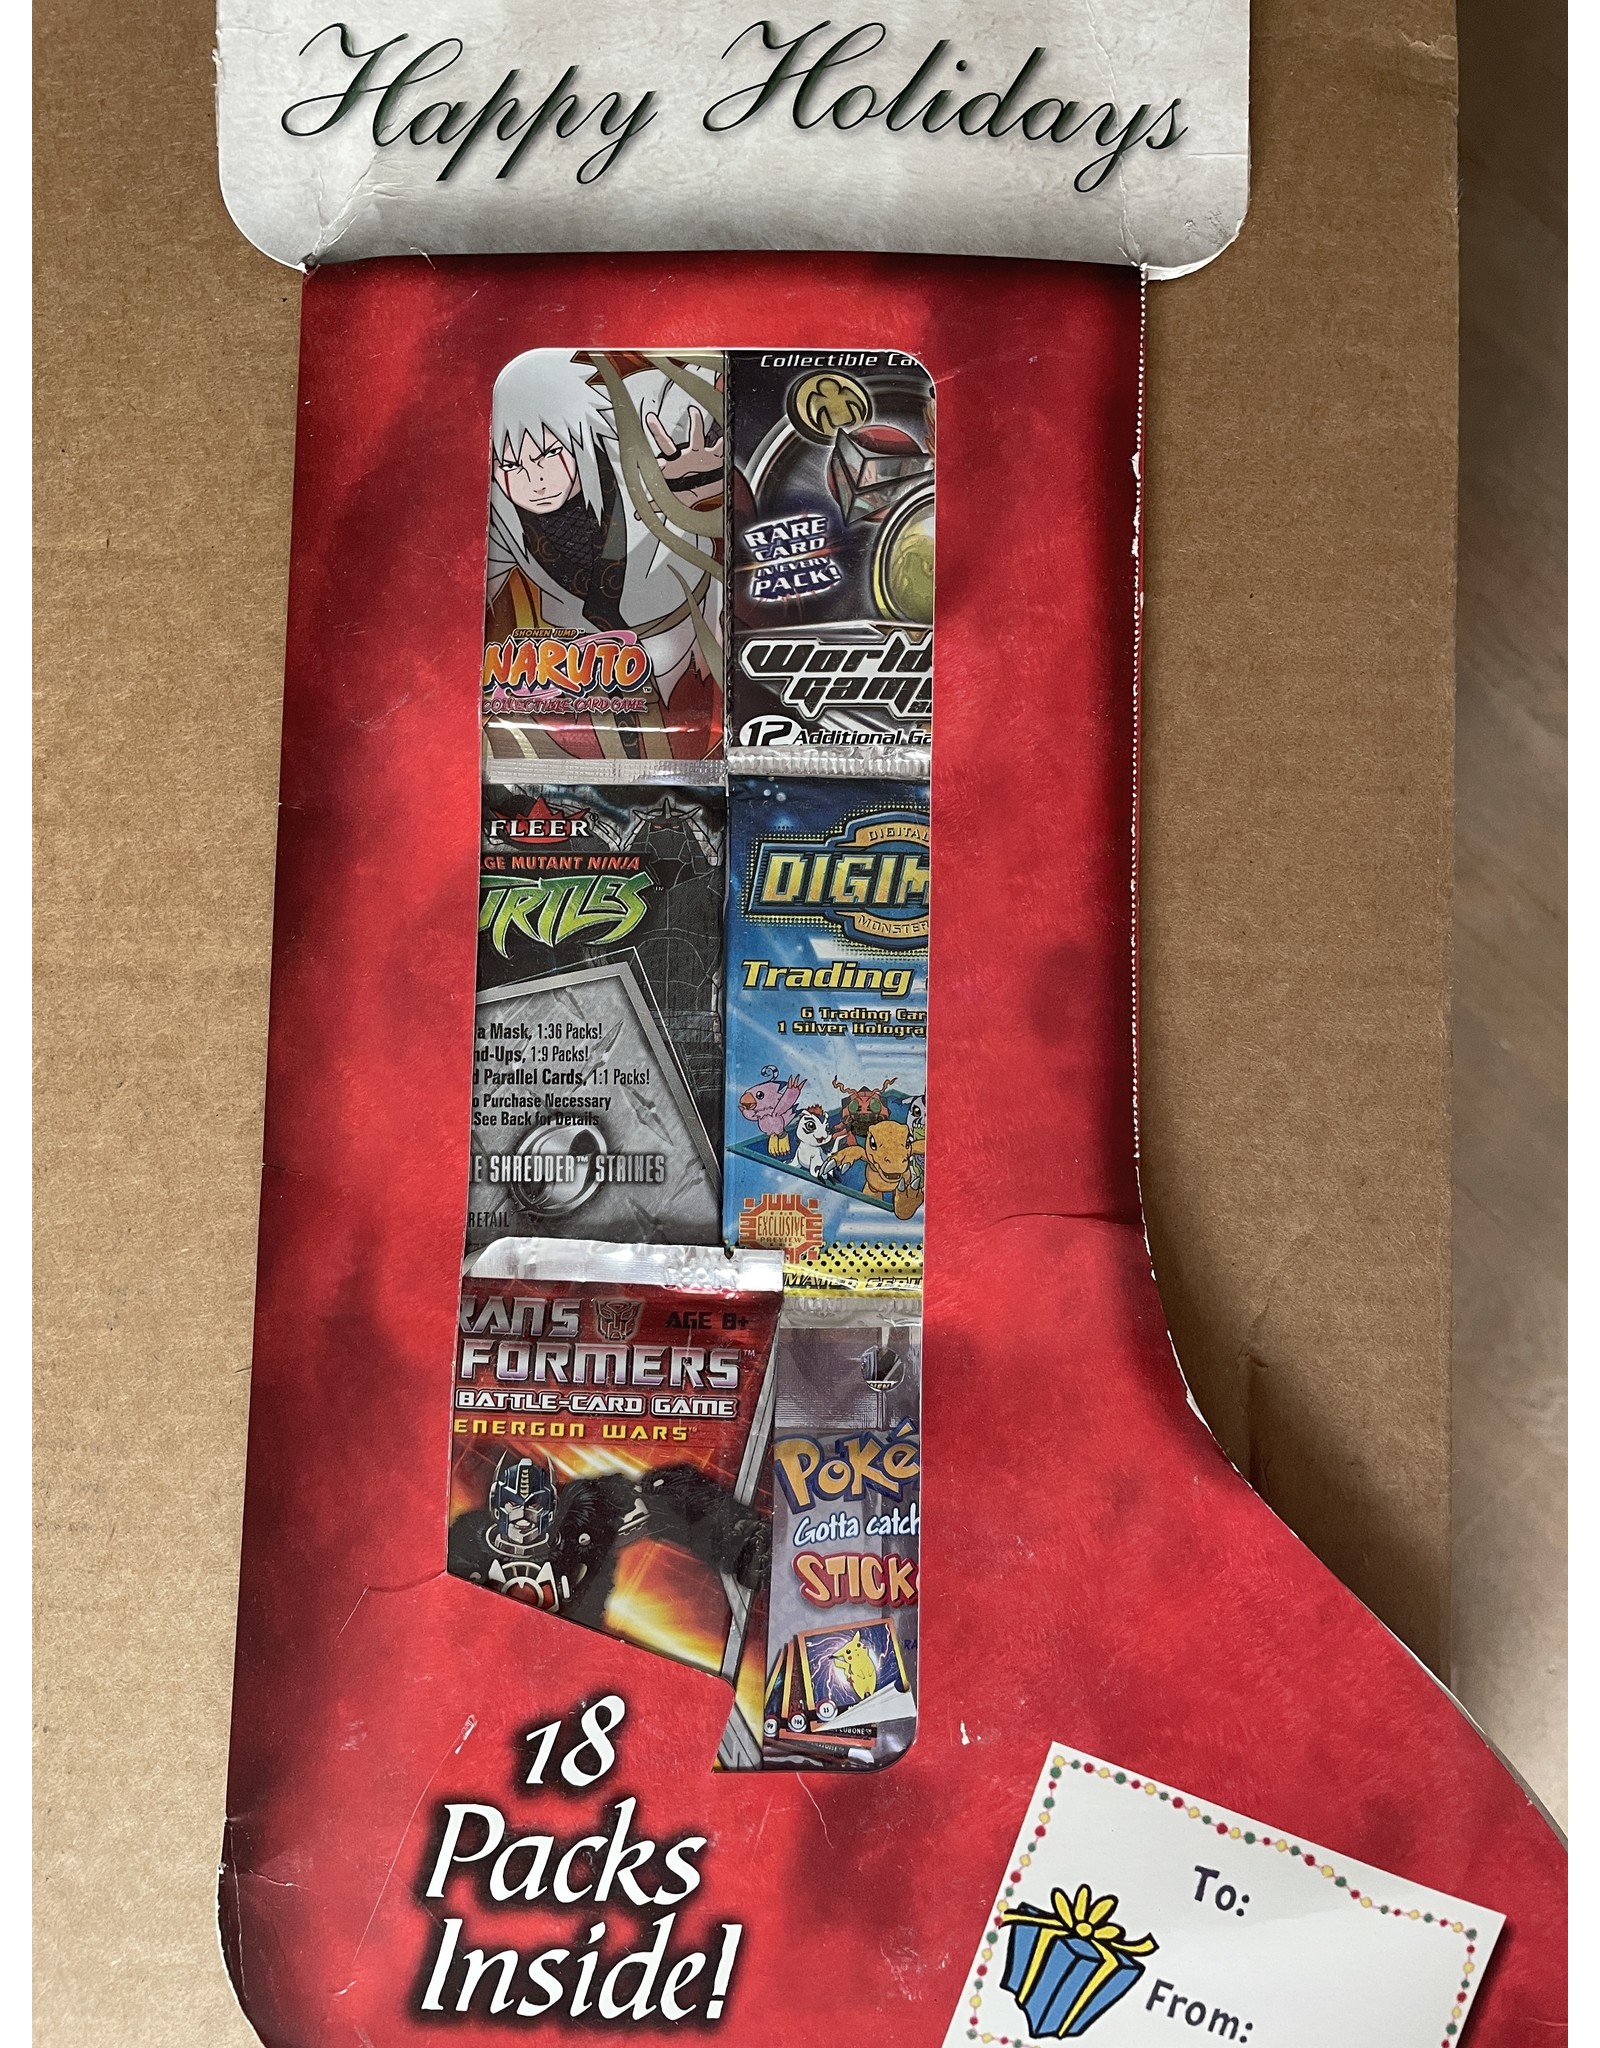 Holiday Stockings from 2010! 18 packs!